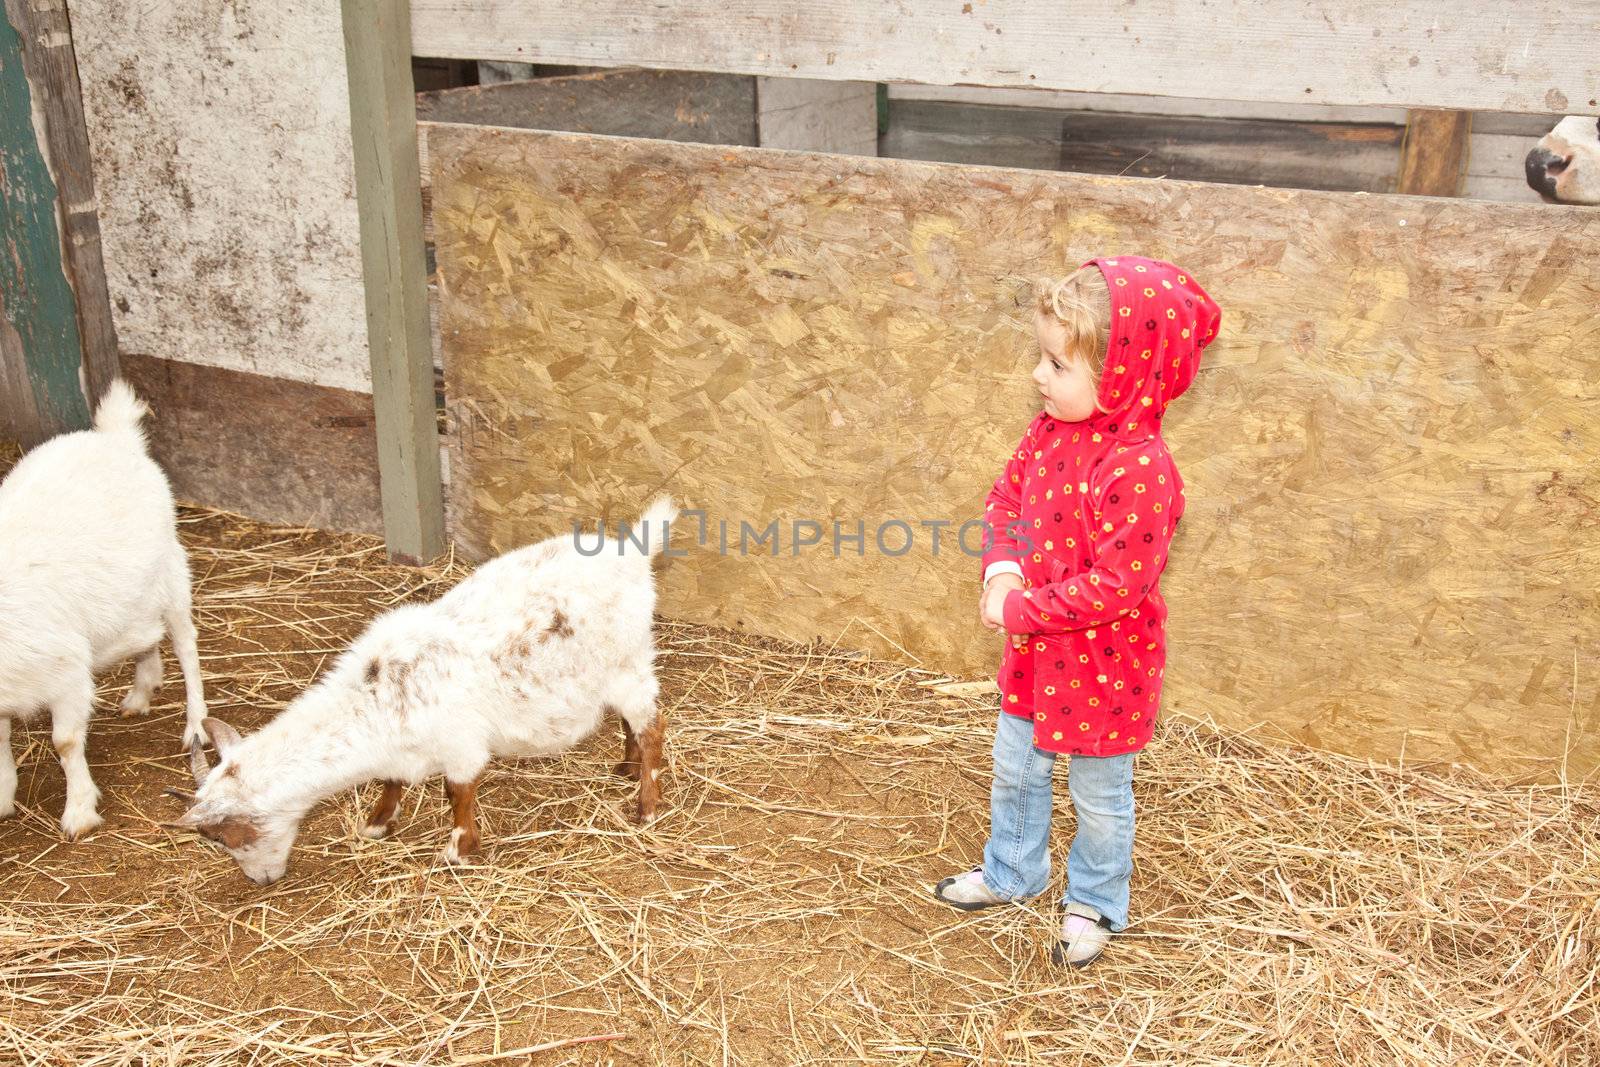 Cute little European toddler girl playing with animals in petting zoo.